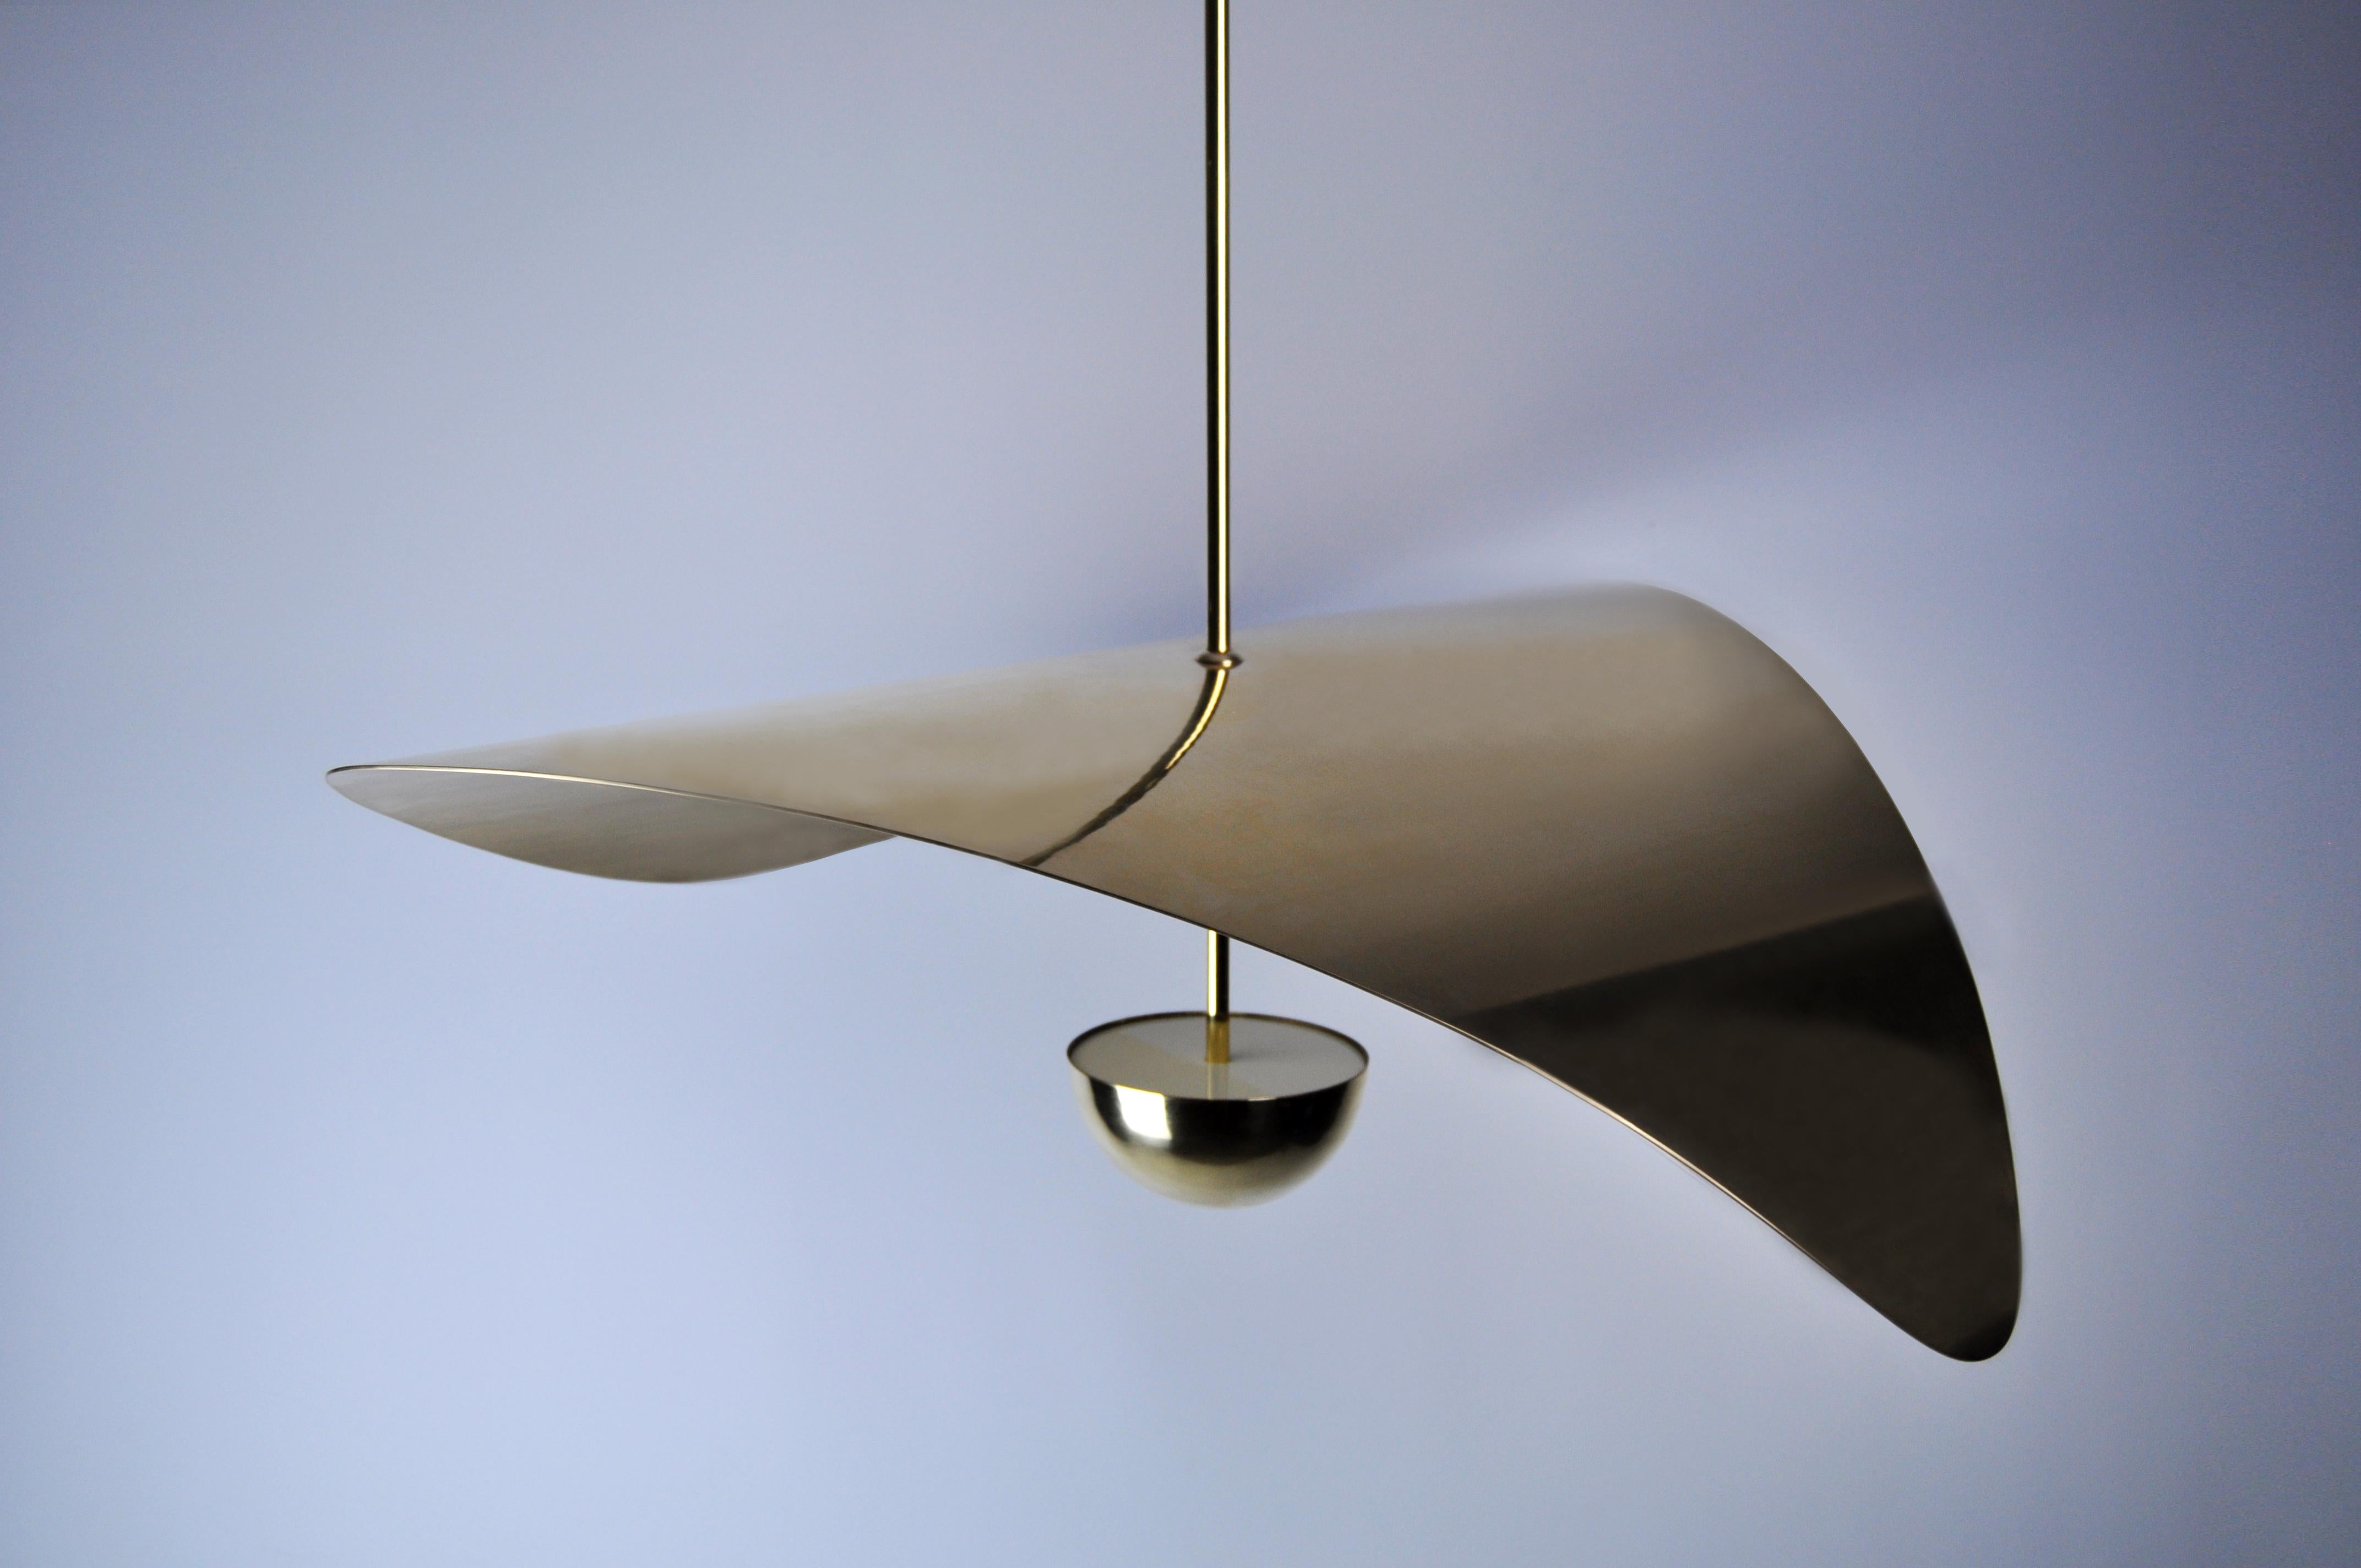 Bonnie Large LED Handmade Sculptural Pendant in Solid Brass, 90cm/35